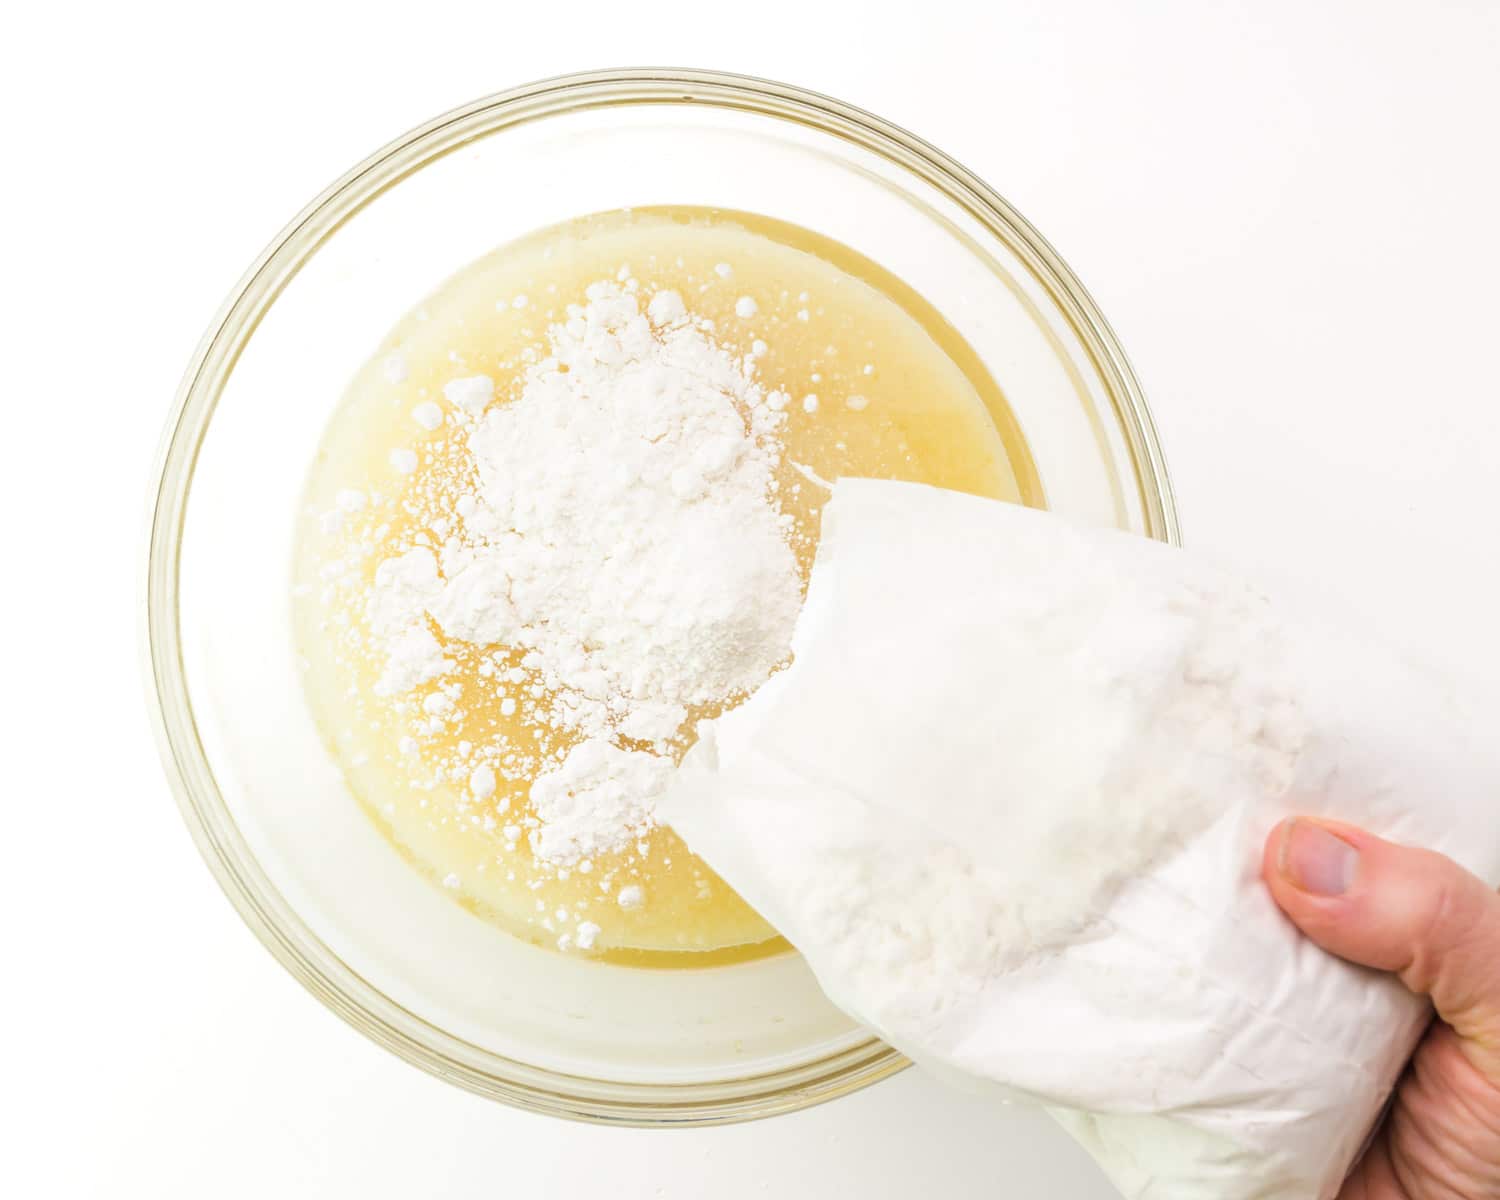 A hand holds a plastic bag of cake mix, pouring it into a mixing bowl with other ingredients.